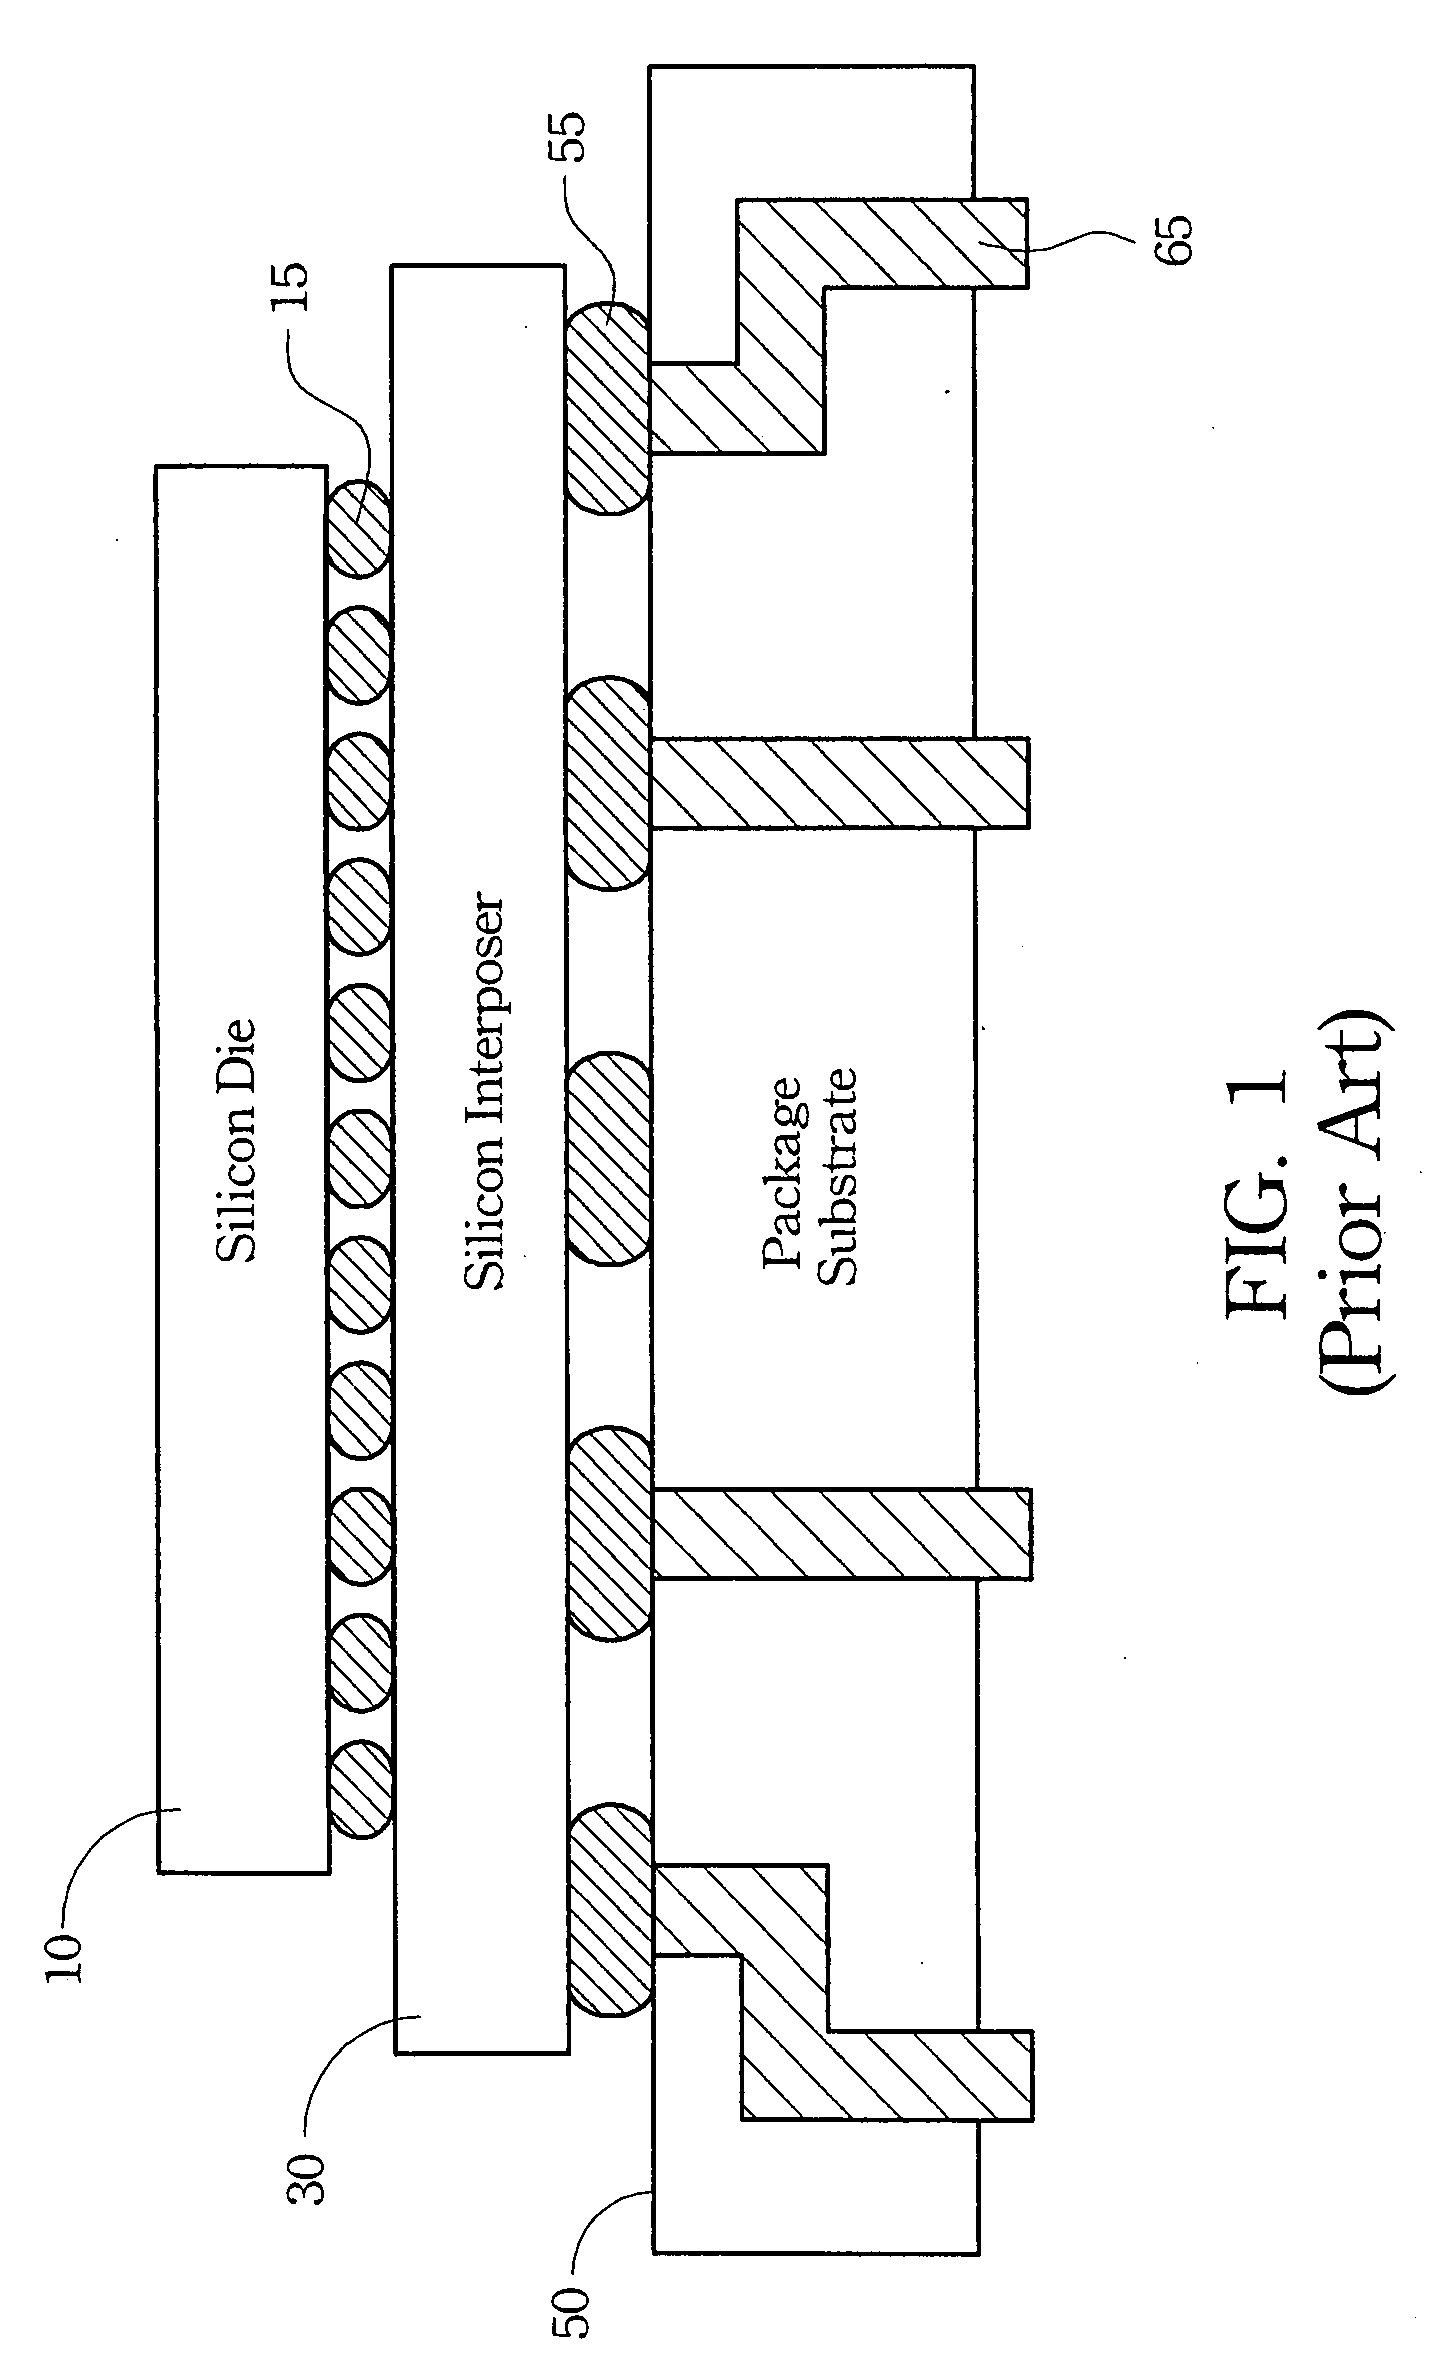 Programmable semiconductor interposer for electronic package and method of forming